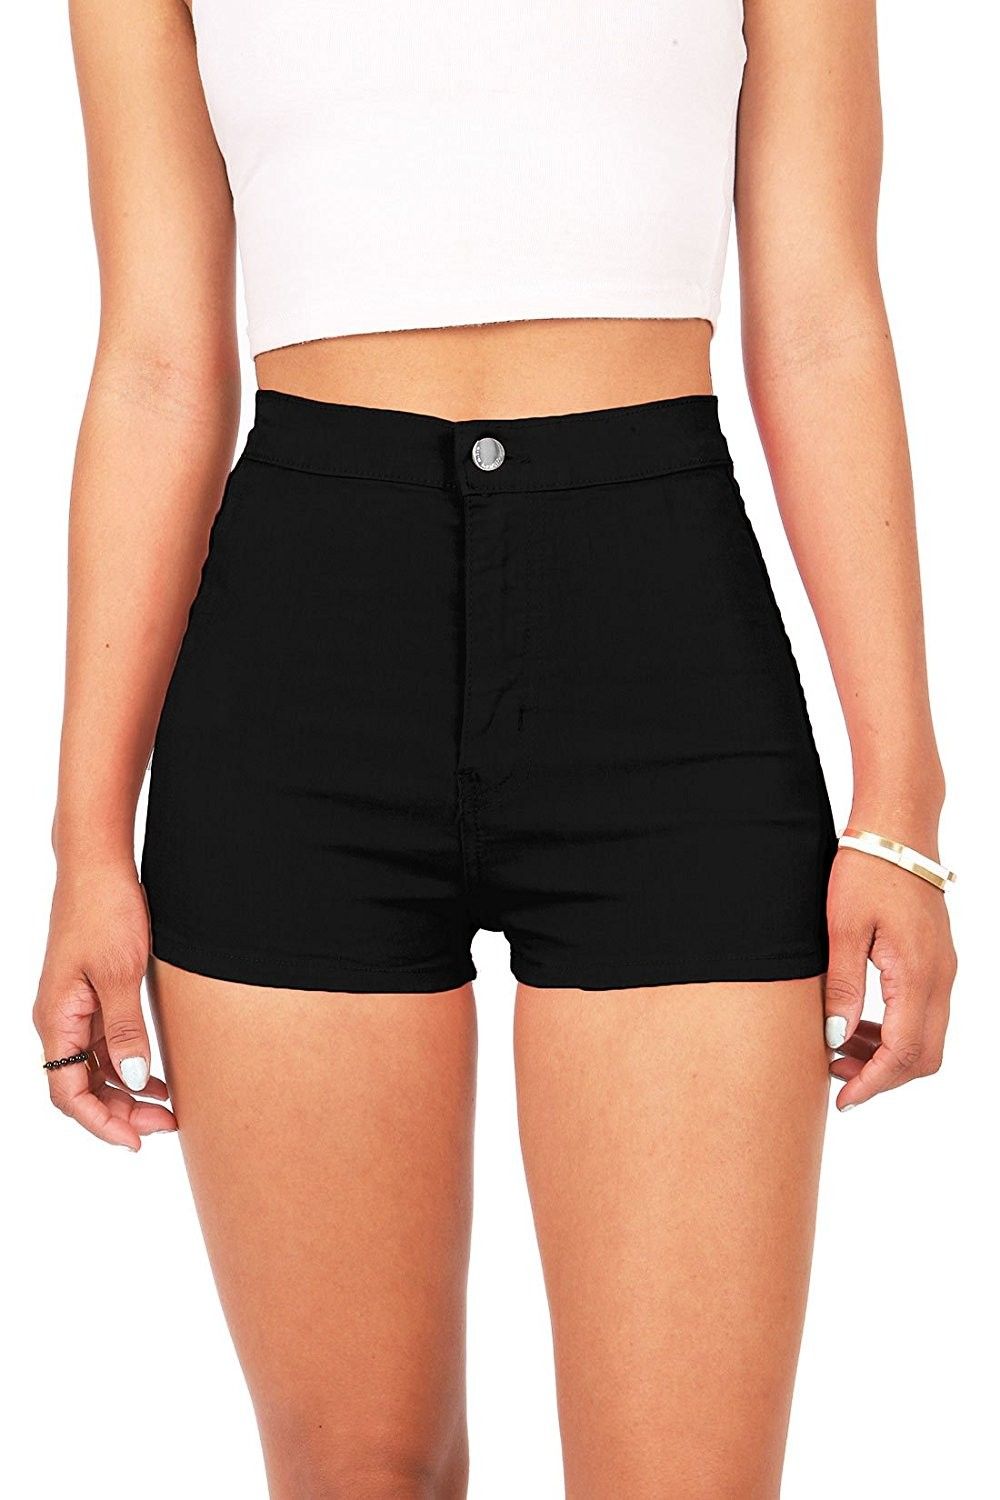 How to Wear Black High Waisted Shorts: Best 15 Stylish Outfit Ideas for Ladies